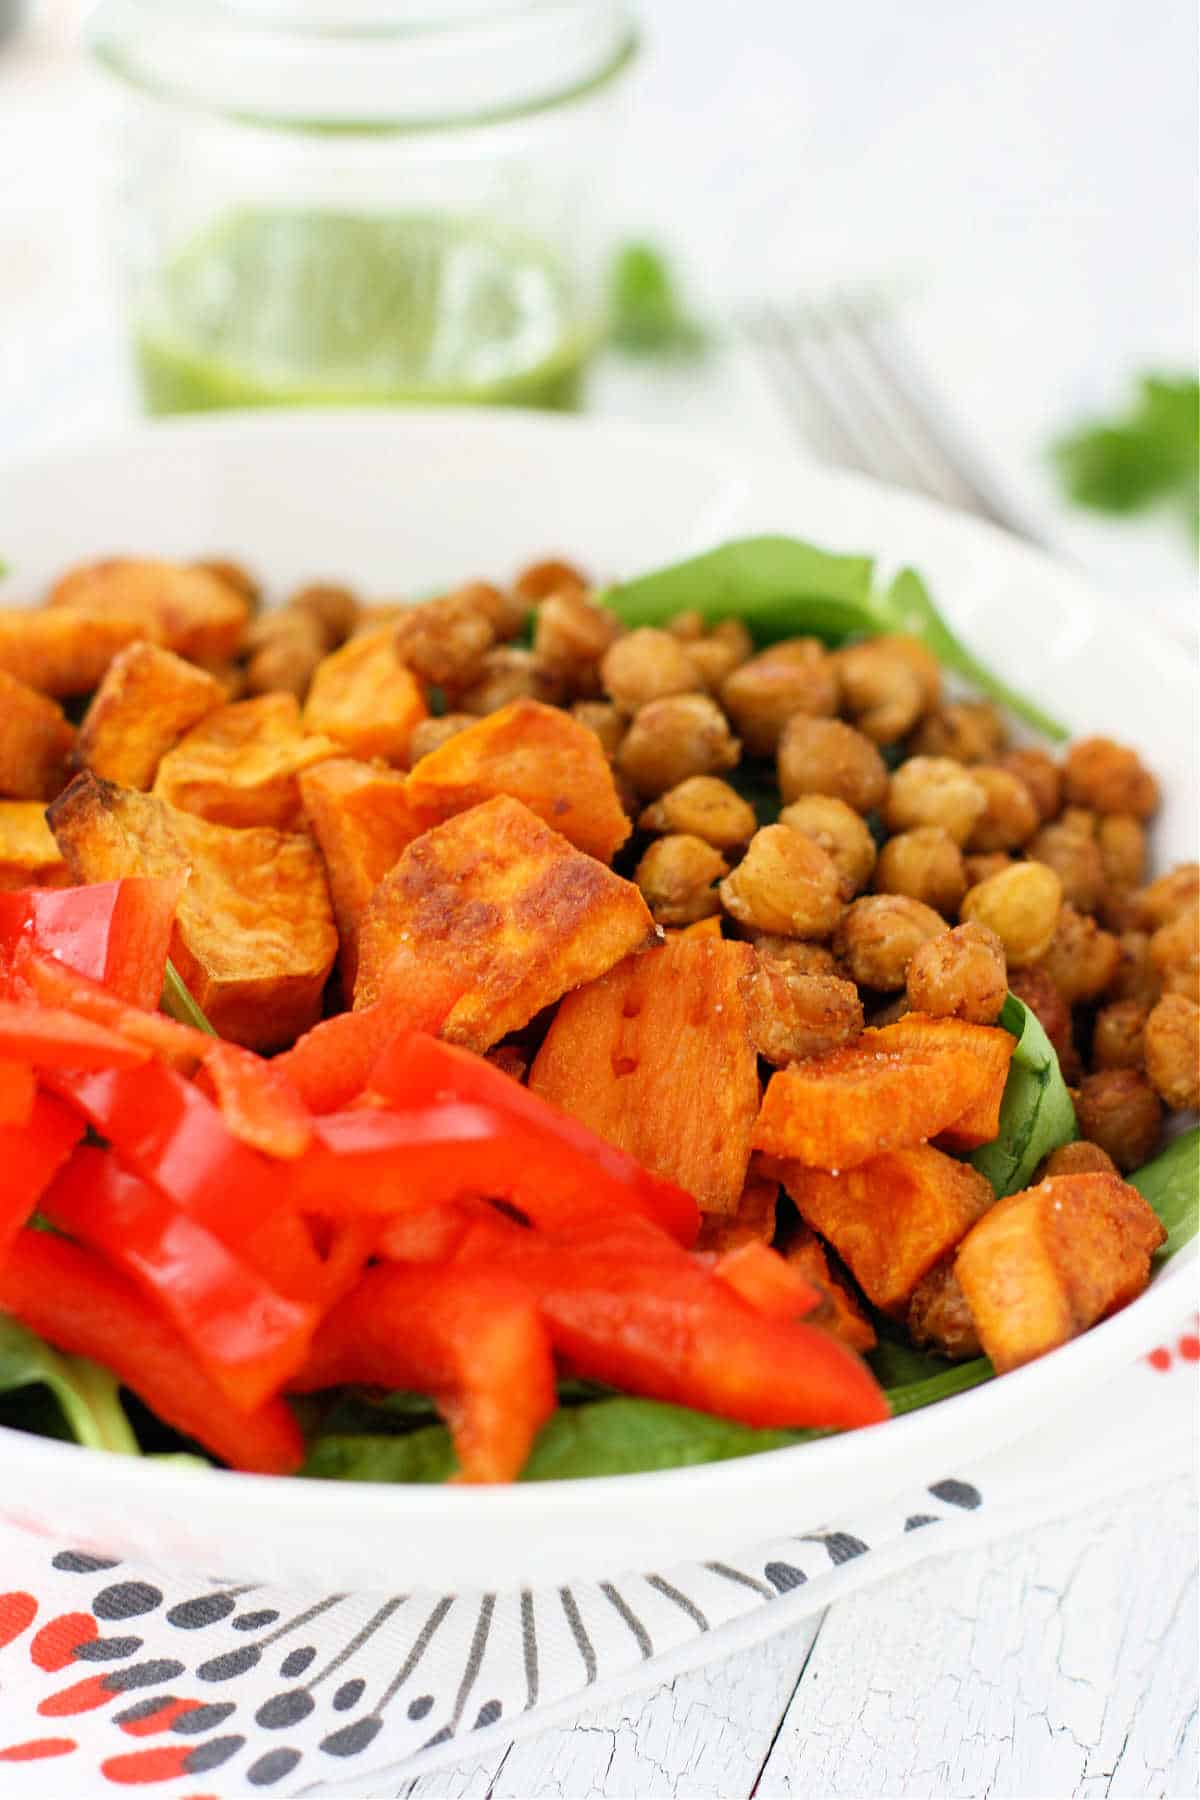 spinach salad with roasted sweet potatoes